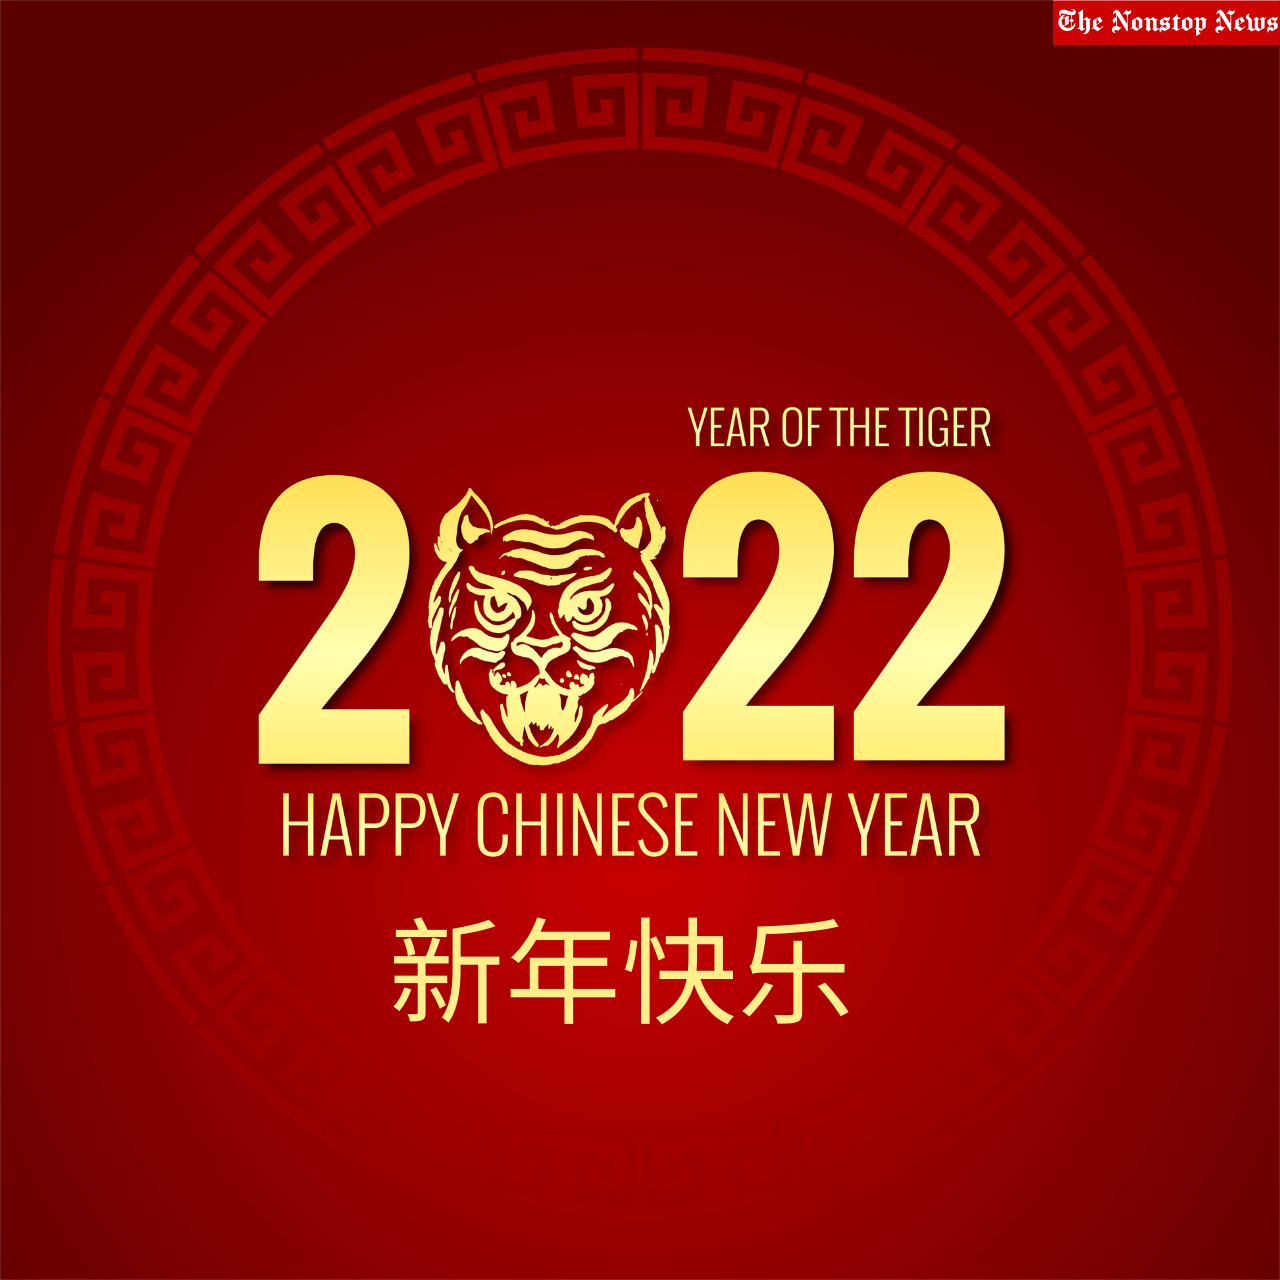 Chinese New Year 2022 Date, History, Significance, Celebration, Activities, and everything you need to know